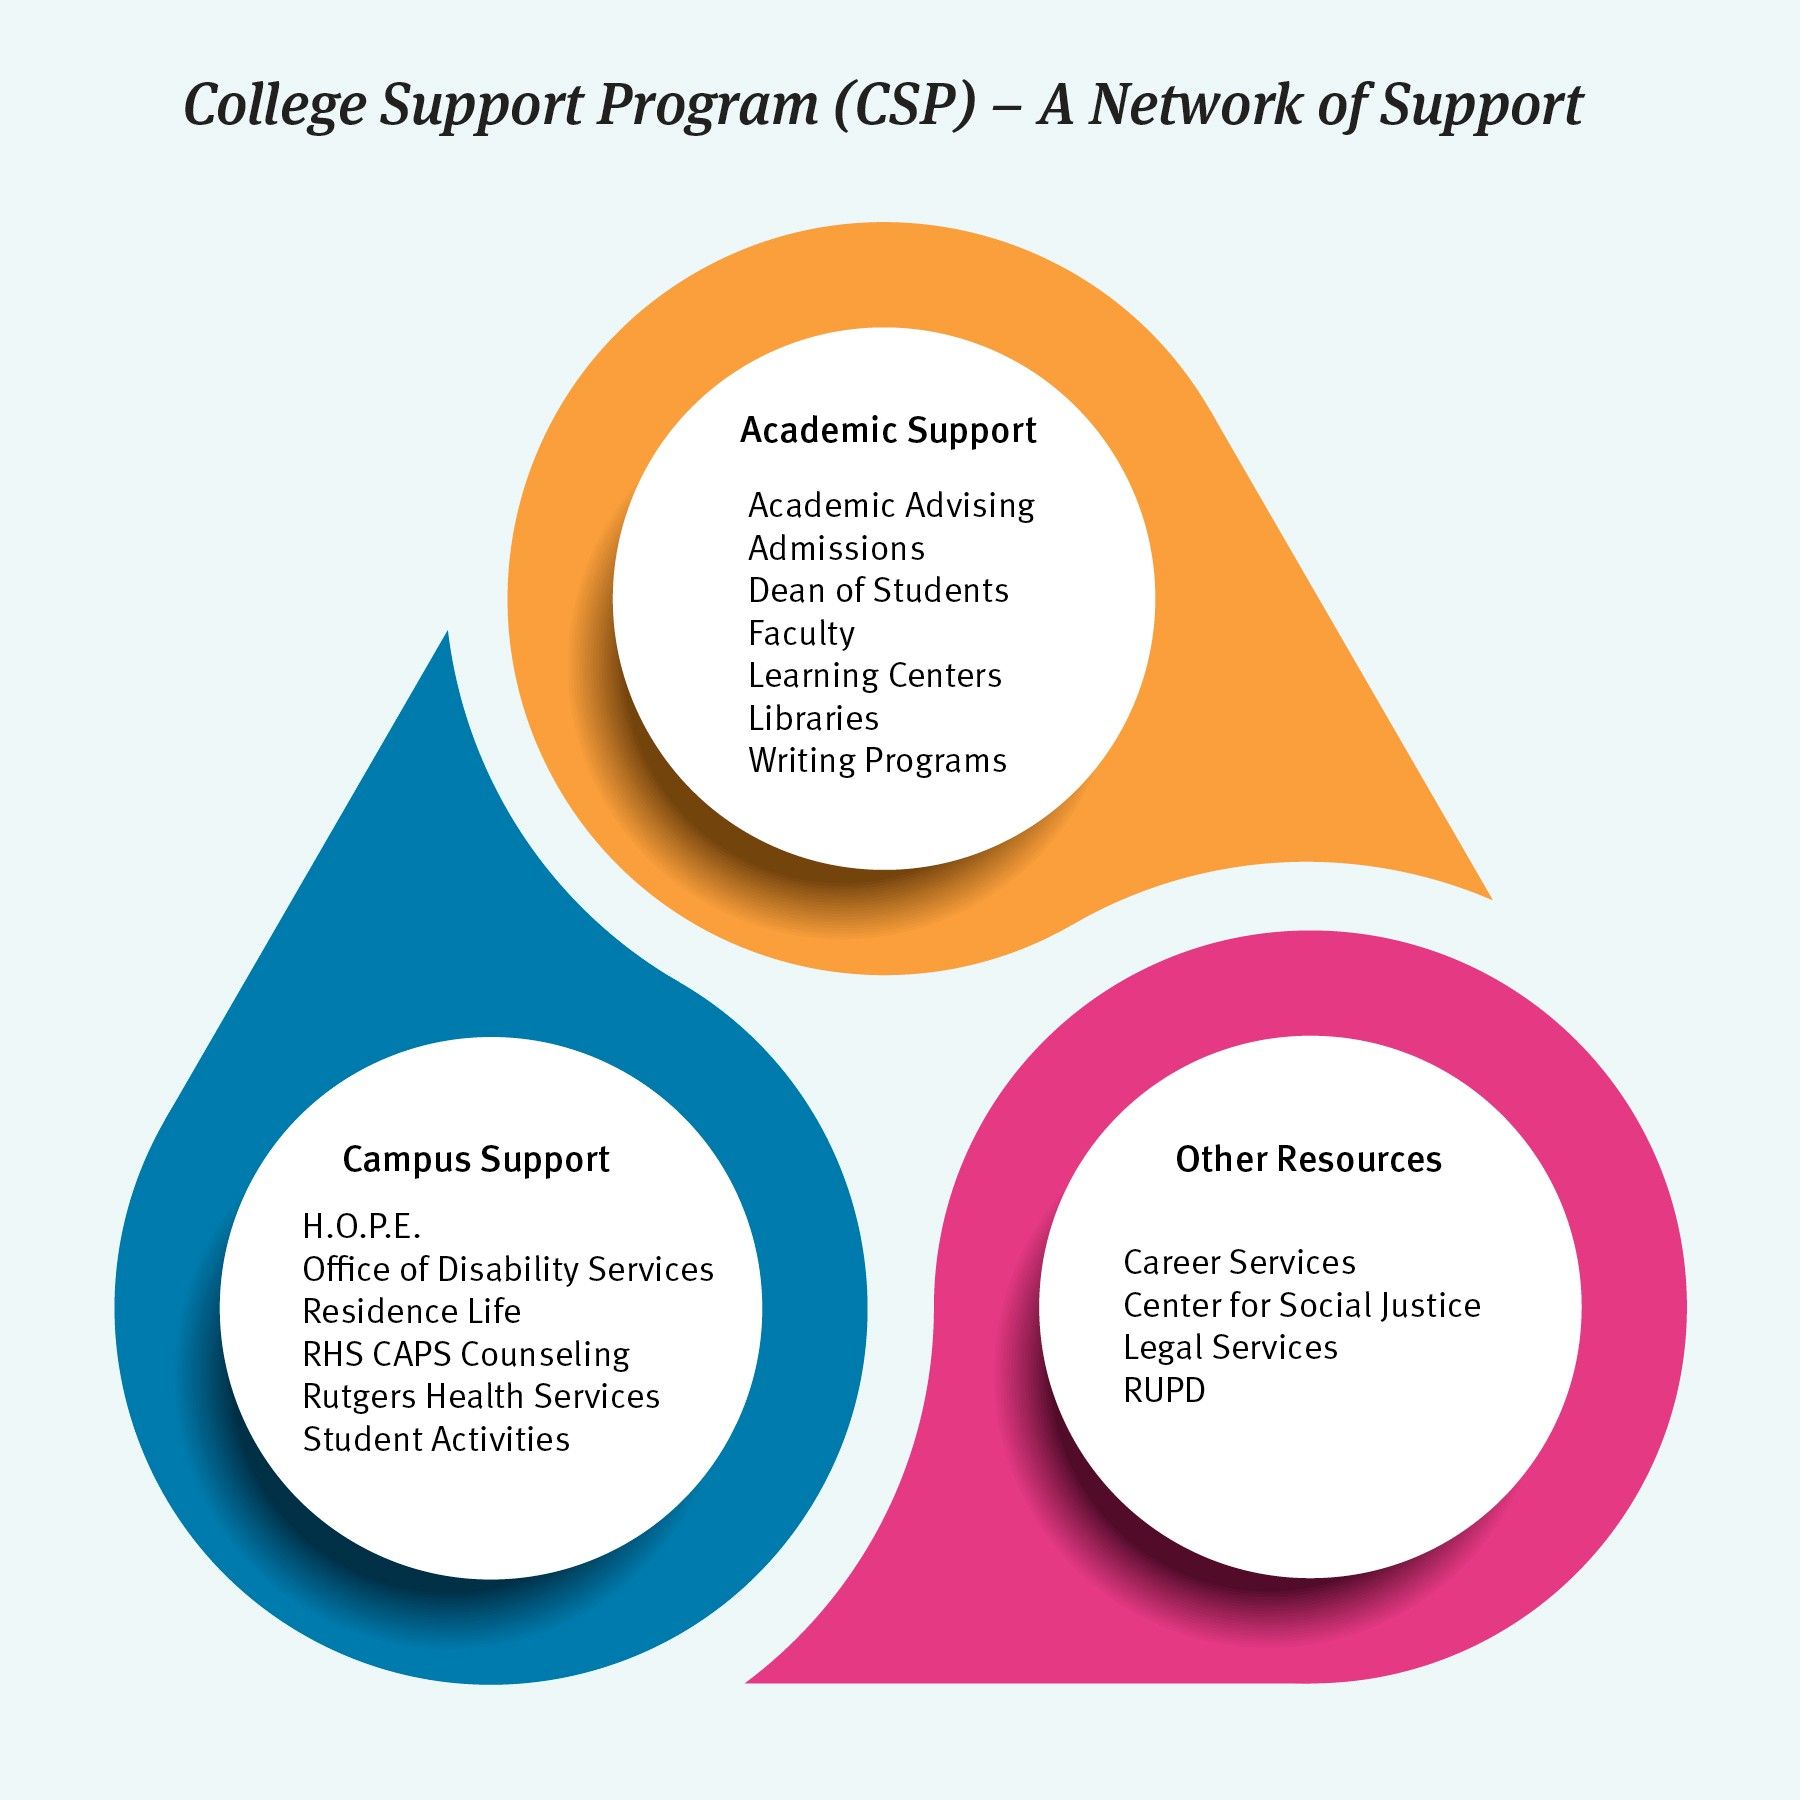 CSP - A Network of Support